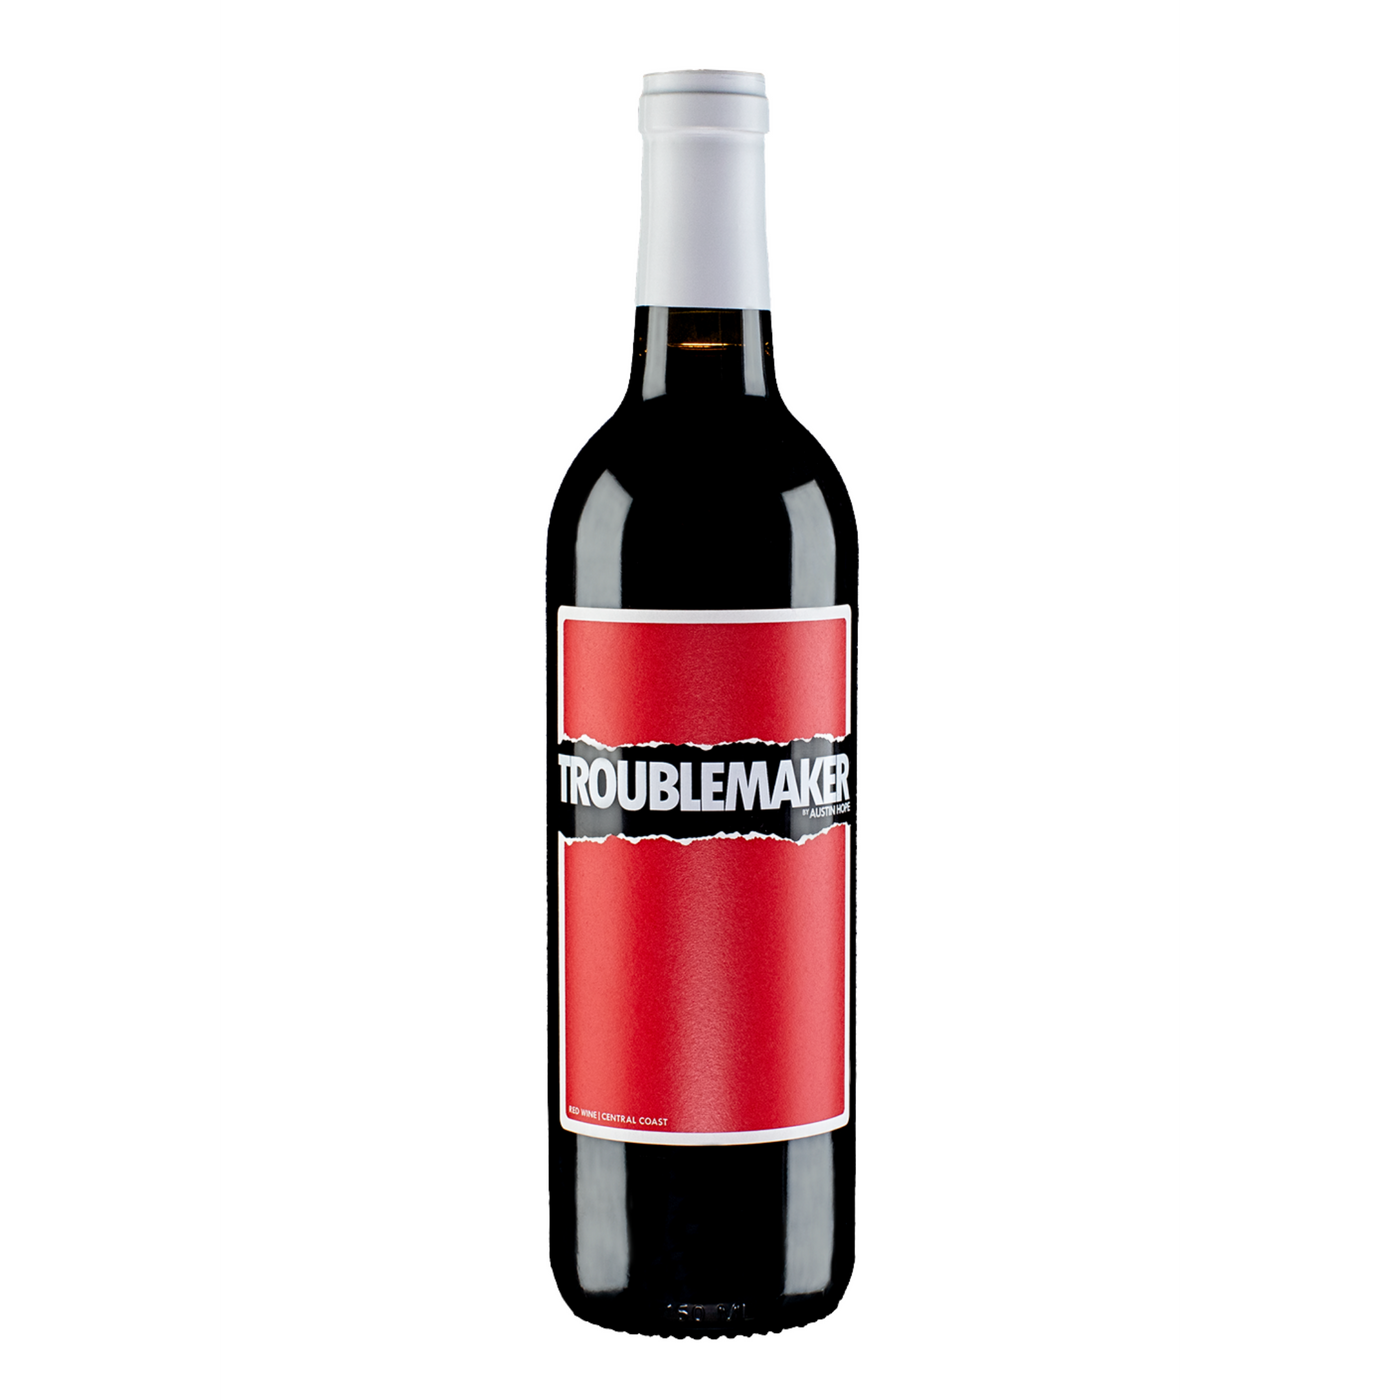 The Troublemaker Blend 14 Paso Robles